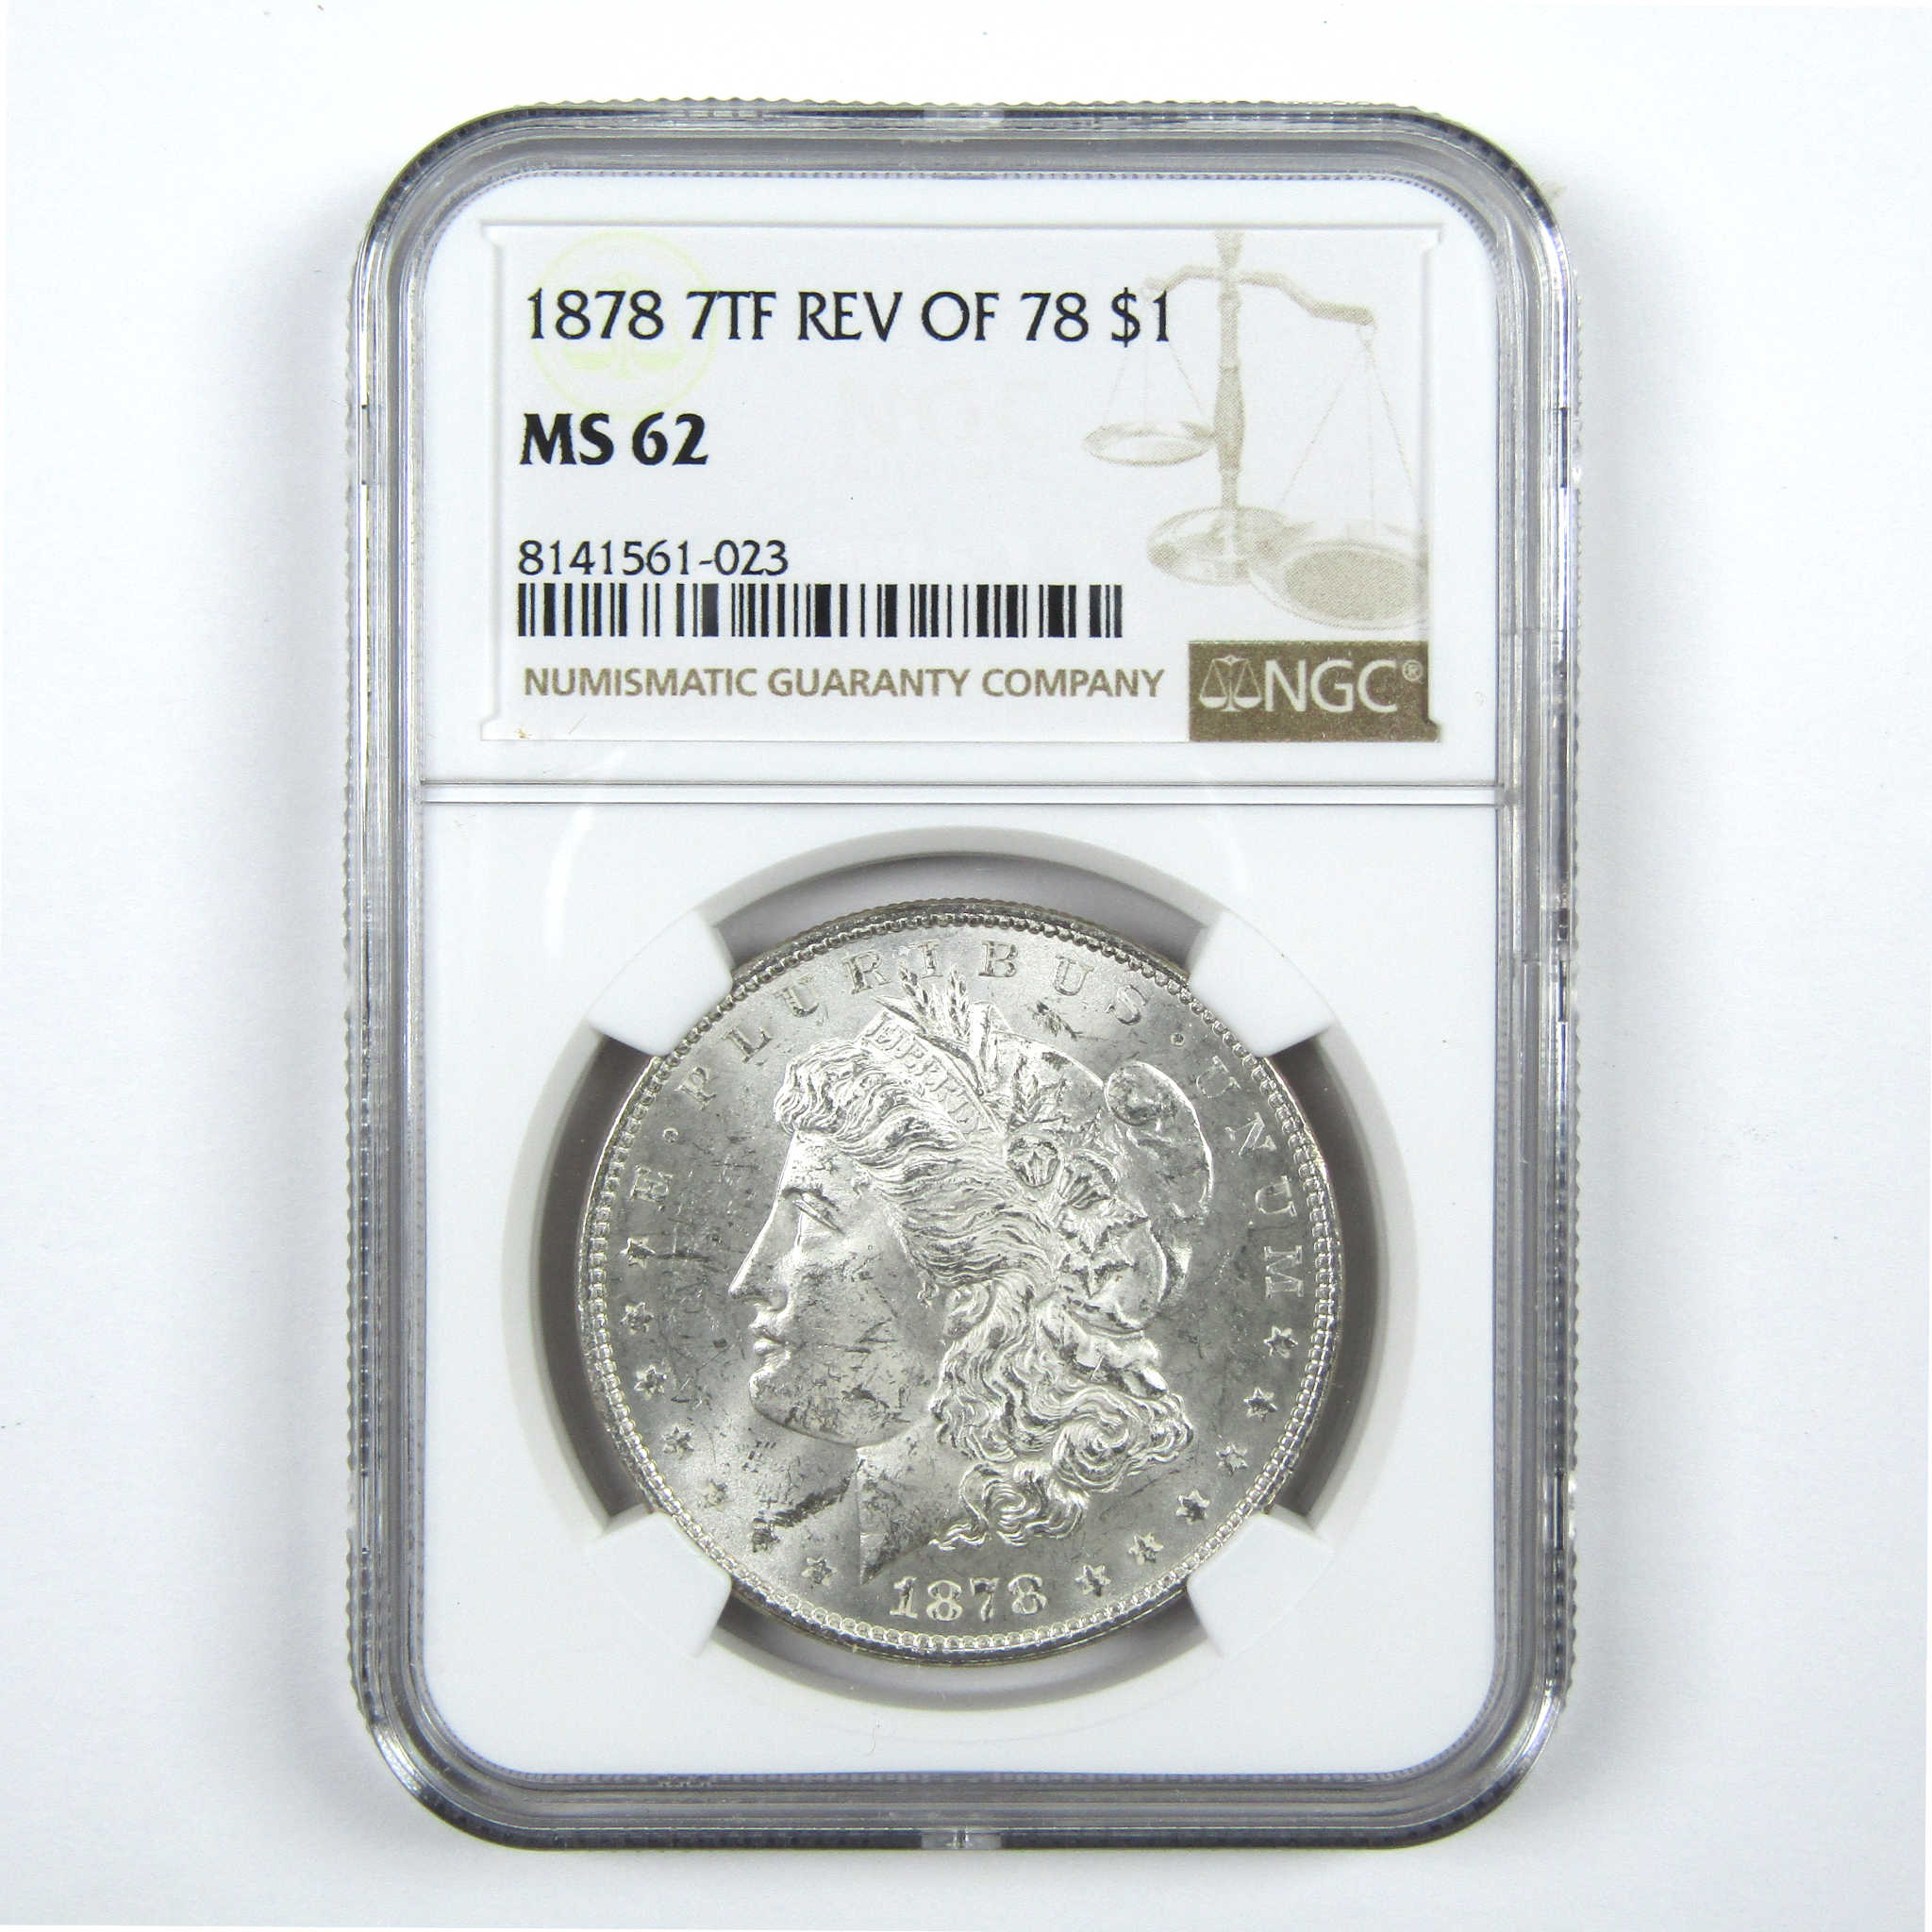 1878 7TF Rev 78 Morgan Dollar MS 62 NGC Uncirculated SKU:I14020 - Morgan coin - Morgan silver dollar - Morgan silver dollar for sale - Profile Coins &amp; Collectibles